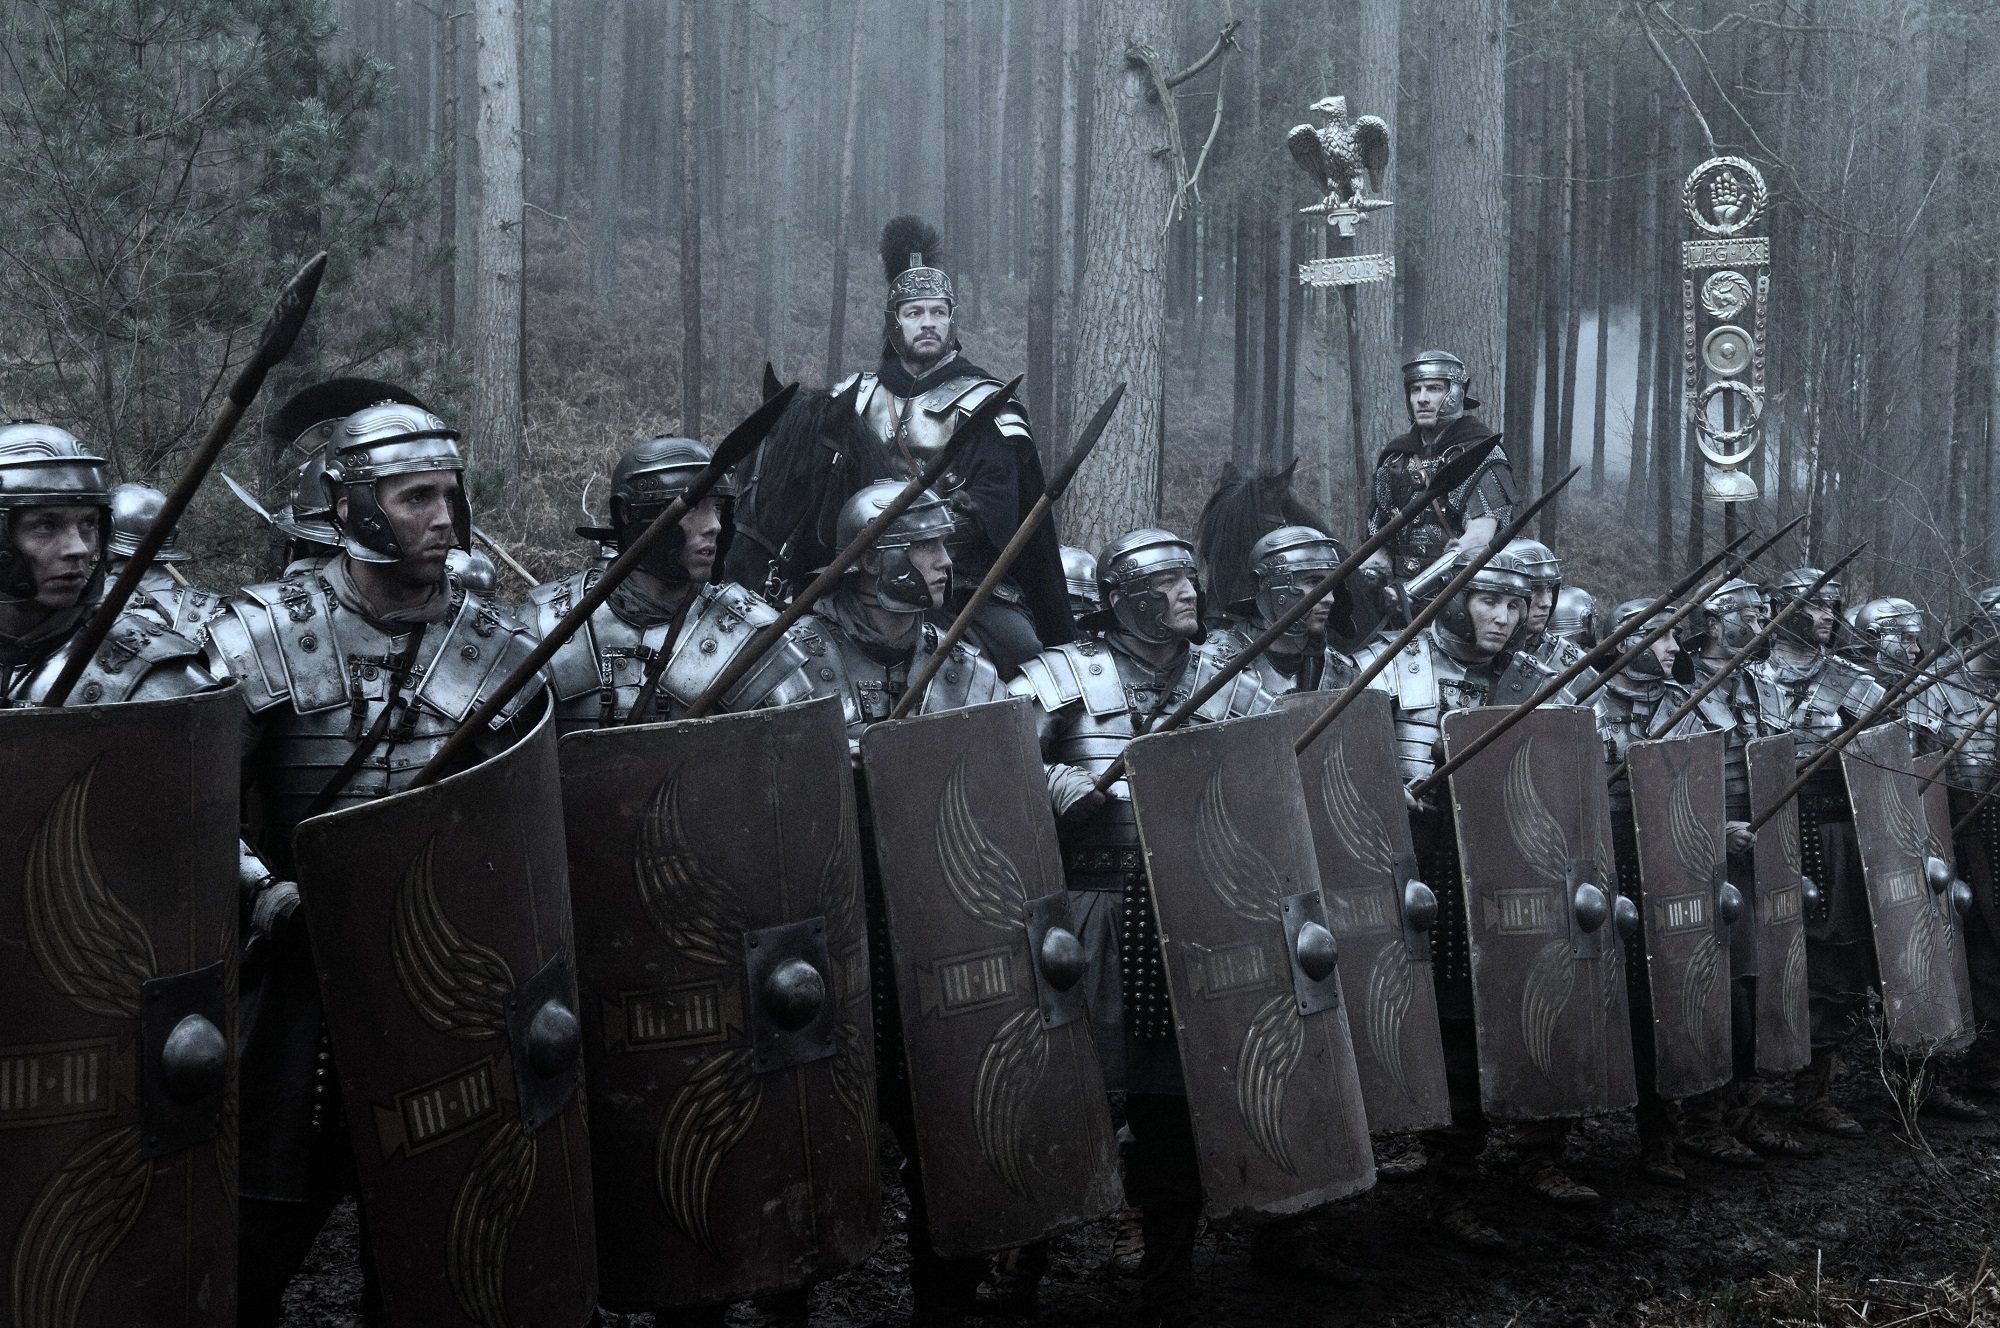 Wallpaper The Centurion Soldiers Rome